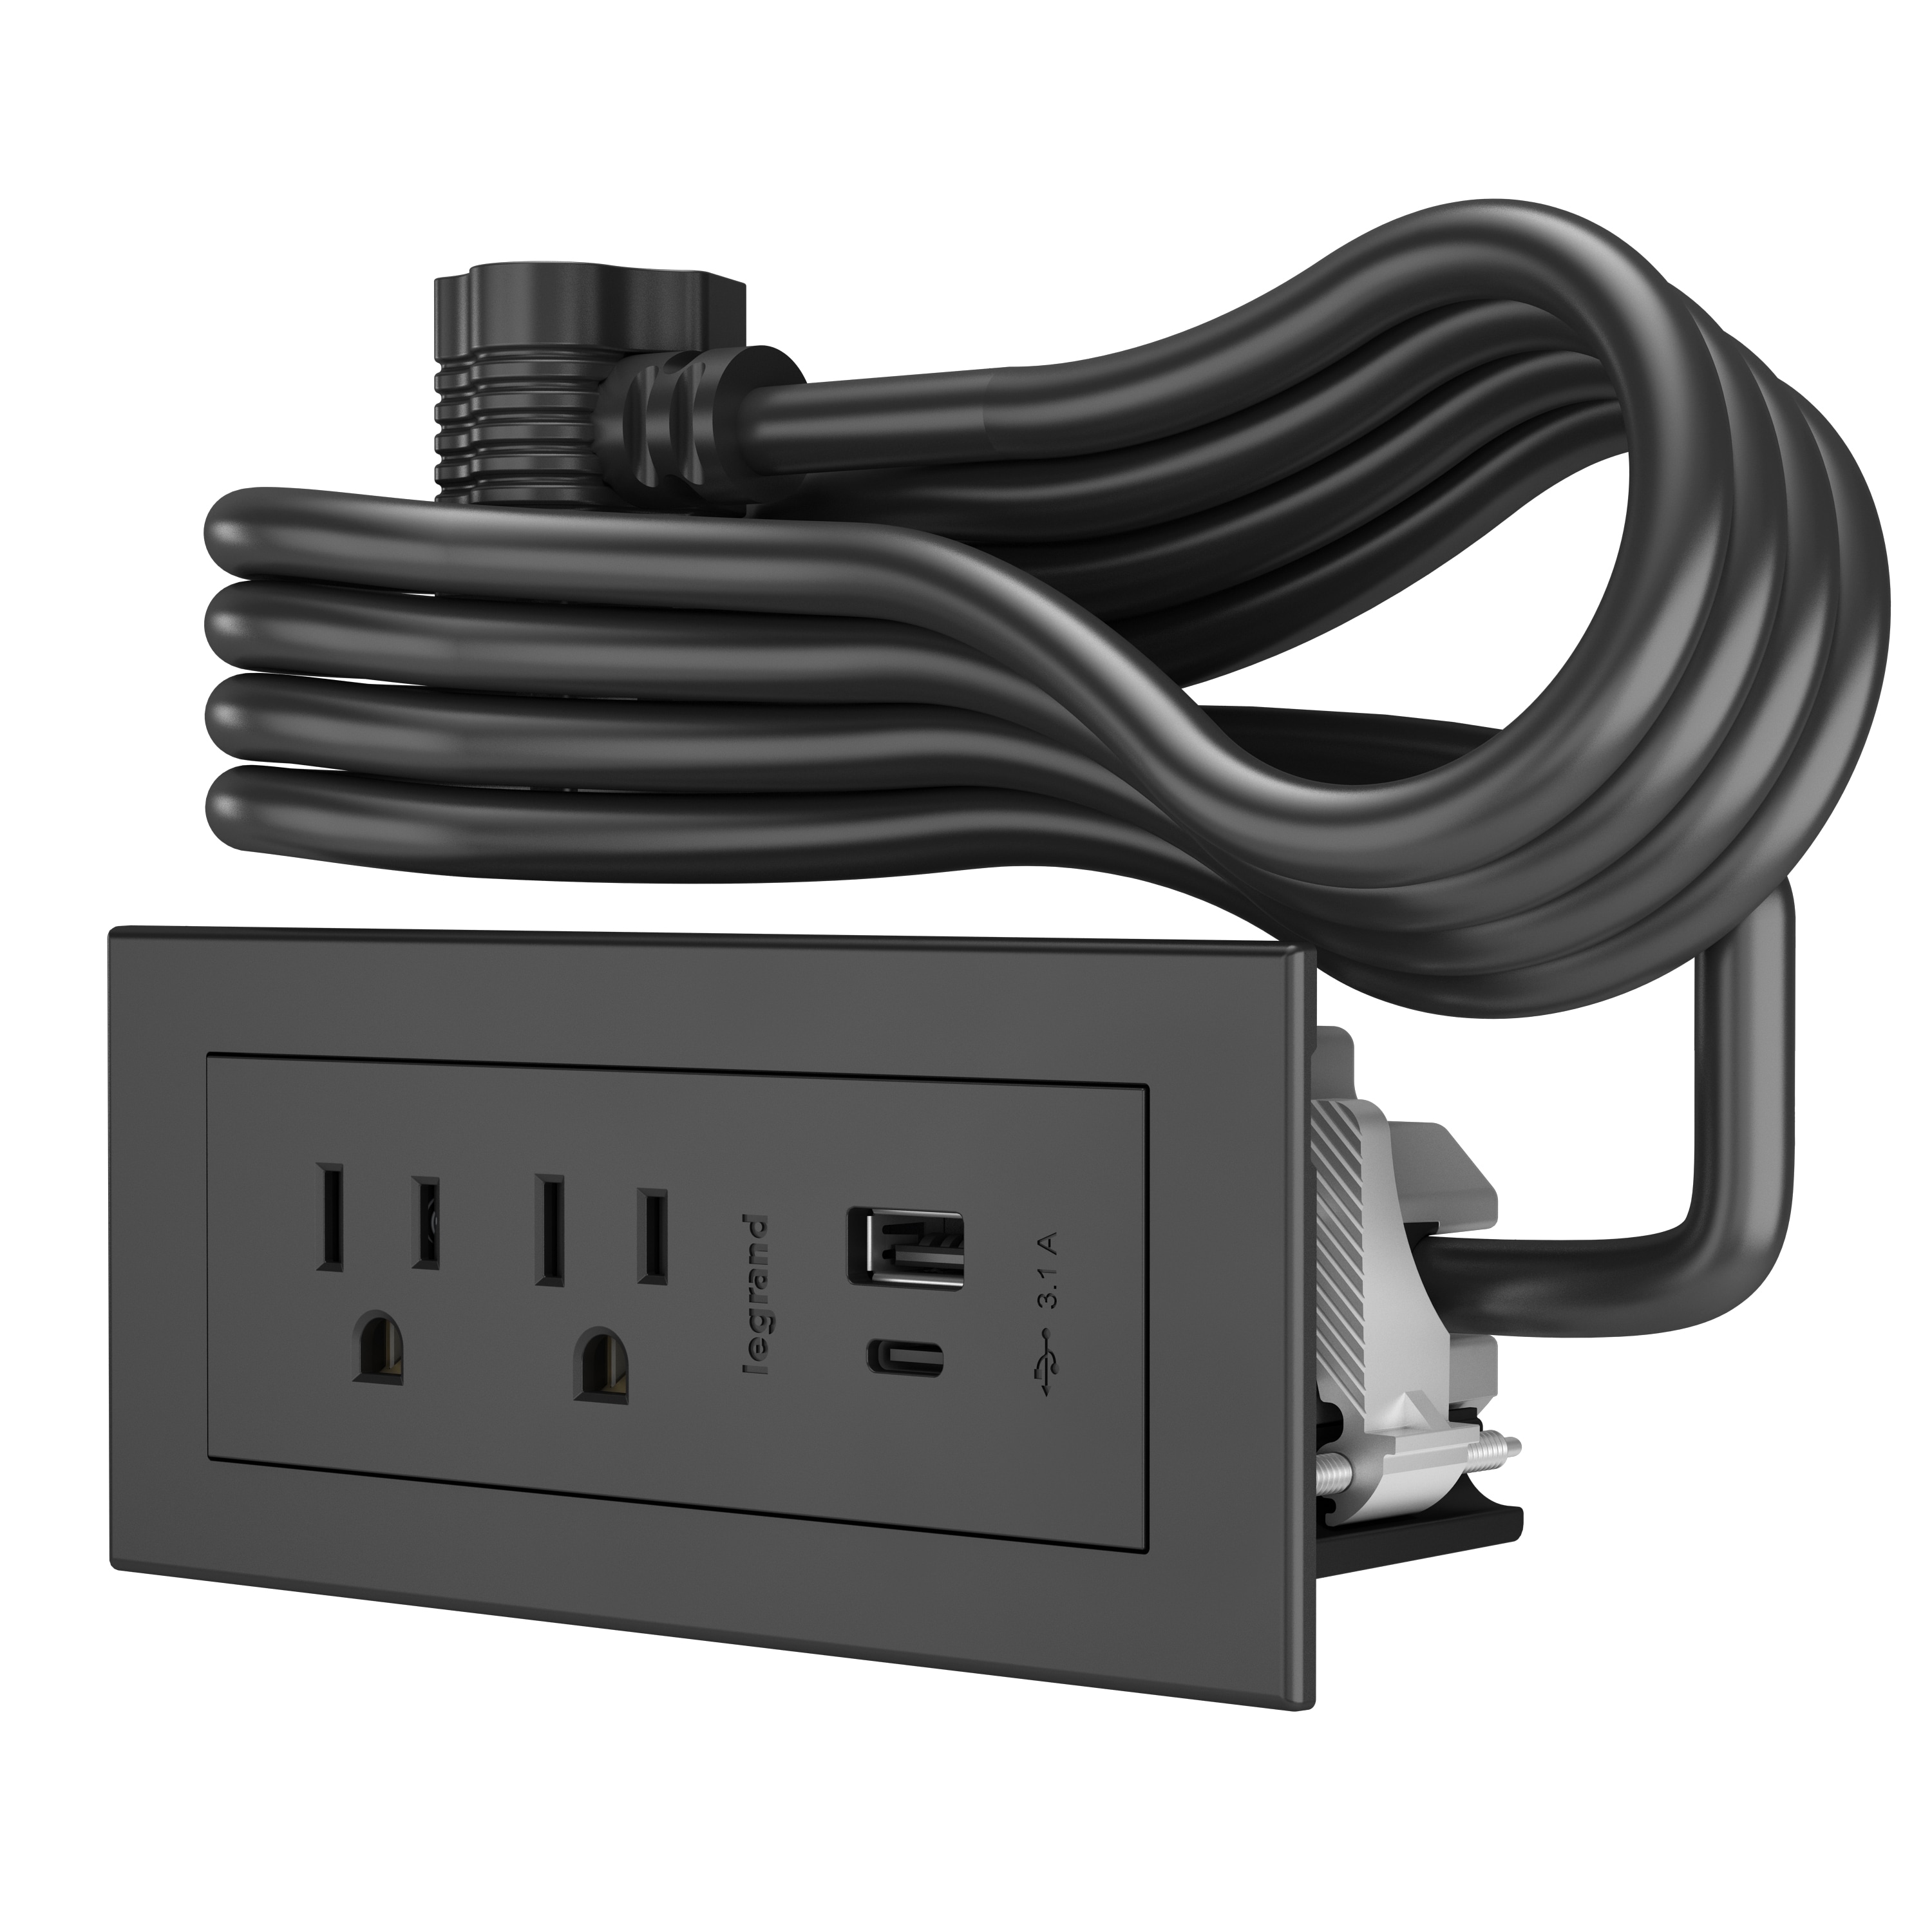 Legrand 2-Outlet 2-USB Ports Indoor Black Power in the Power Strips department at Lowes.com